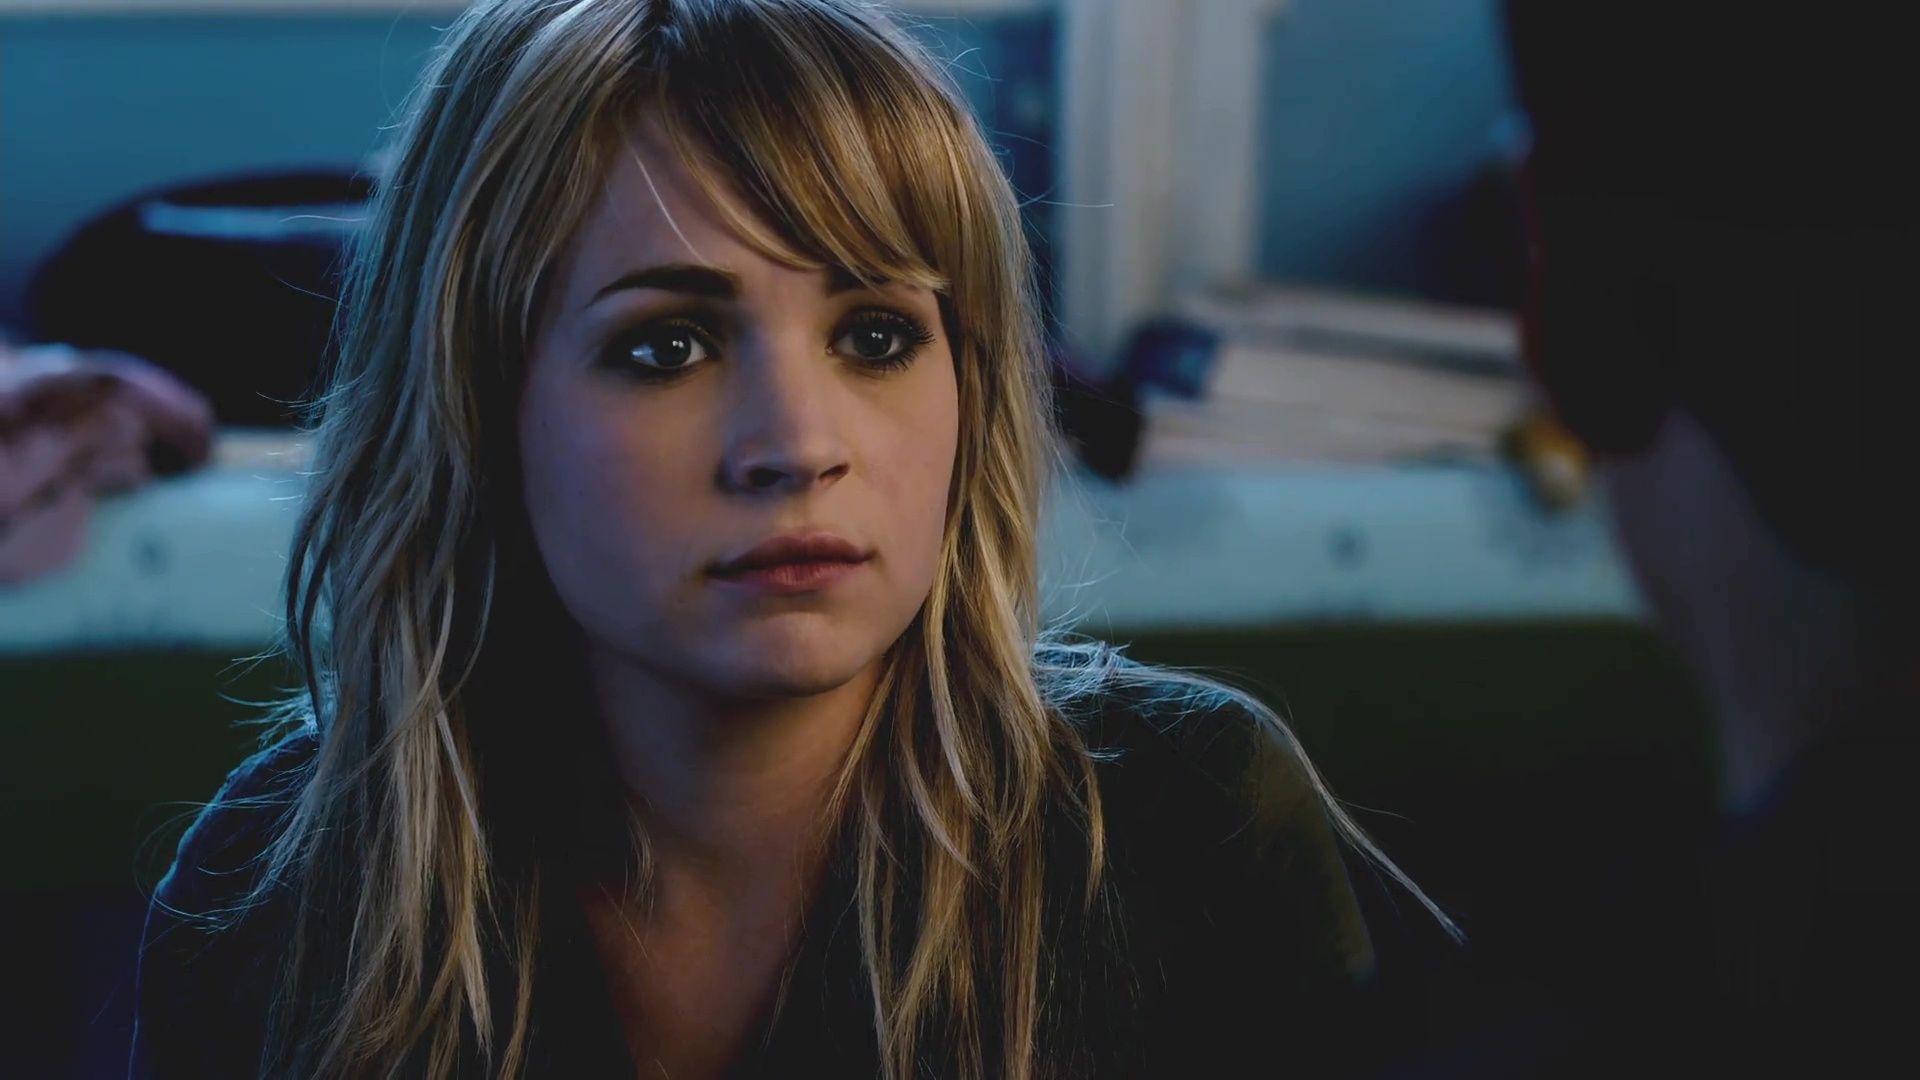 britt robertson in the film the first time doing